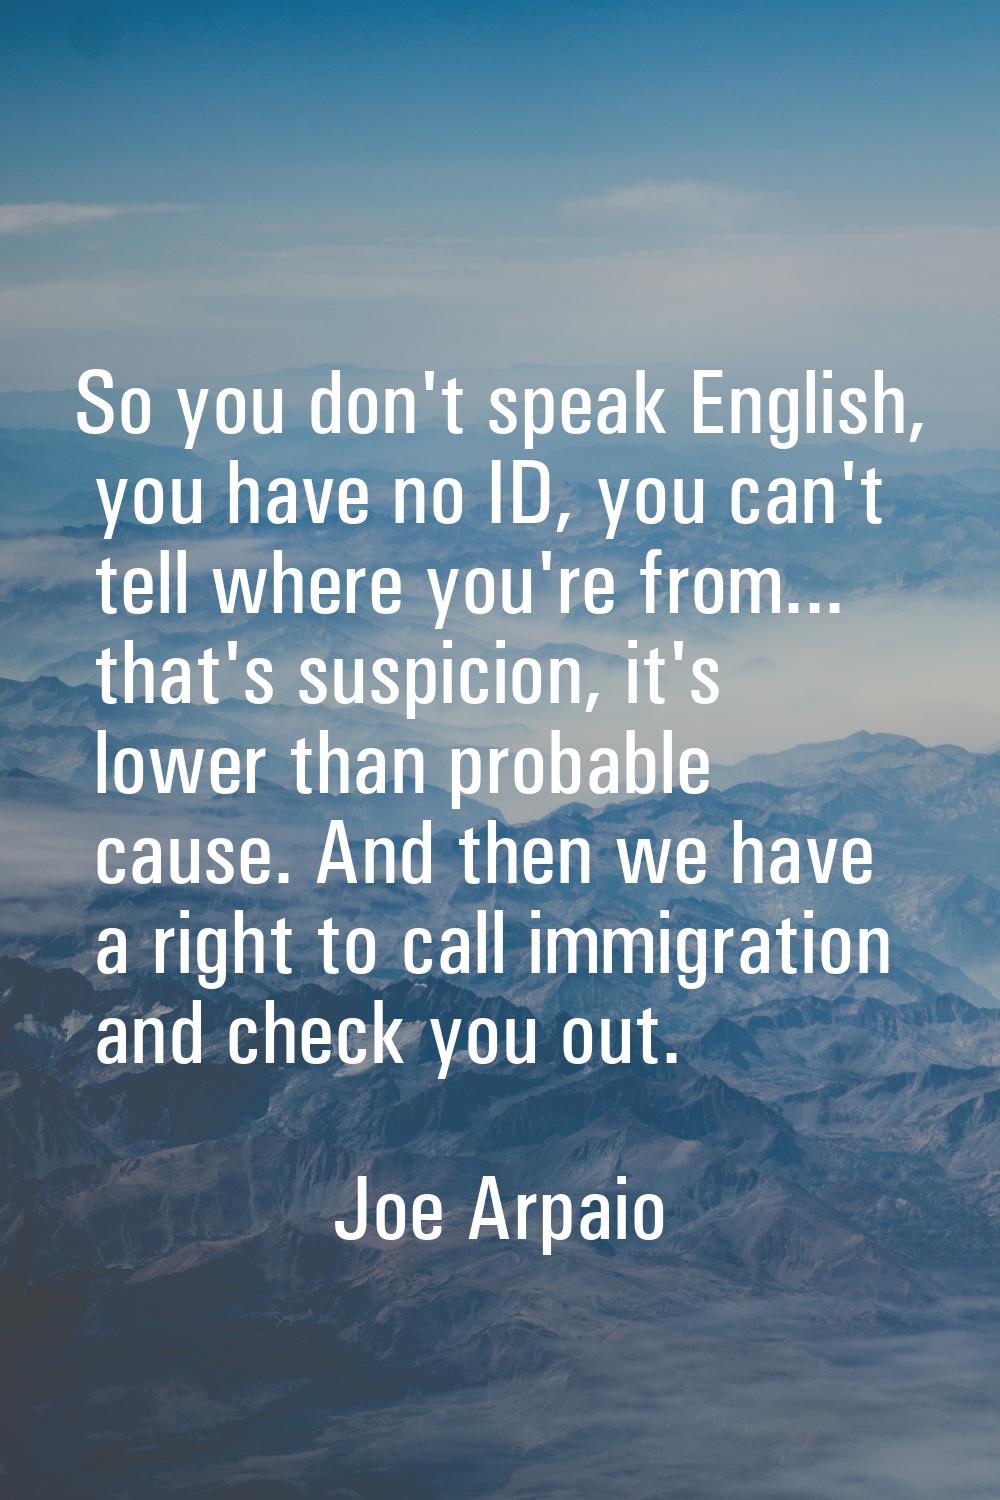 So you don't speak English, you have no ID, you can't tell where you're from... that's suspicion, i